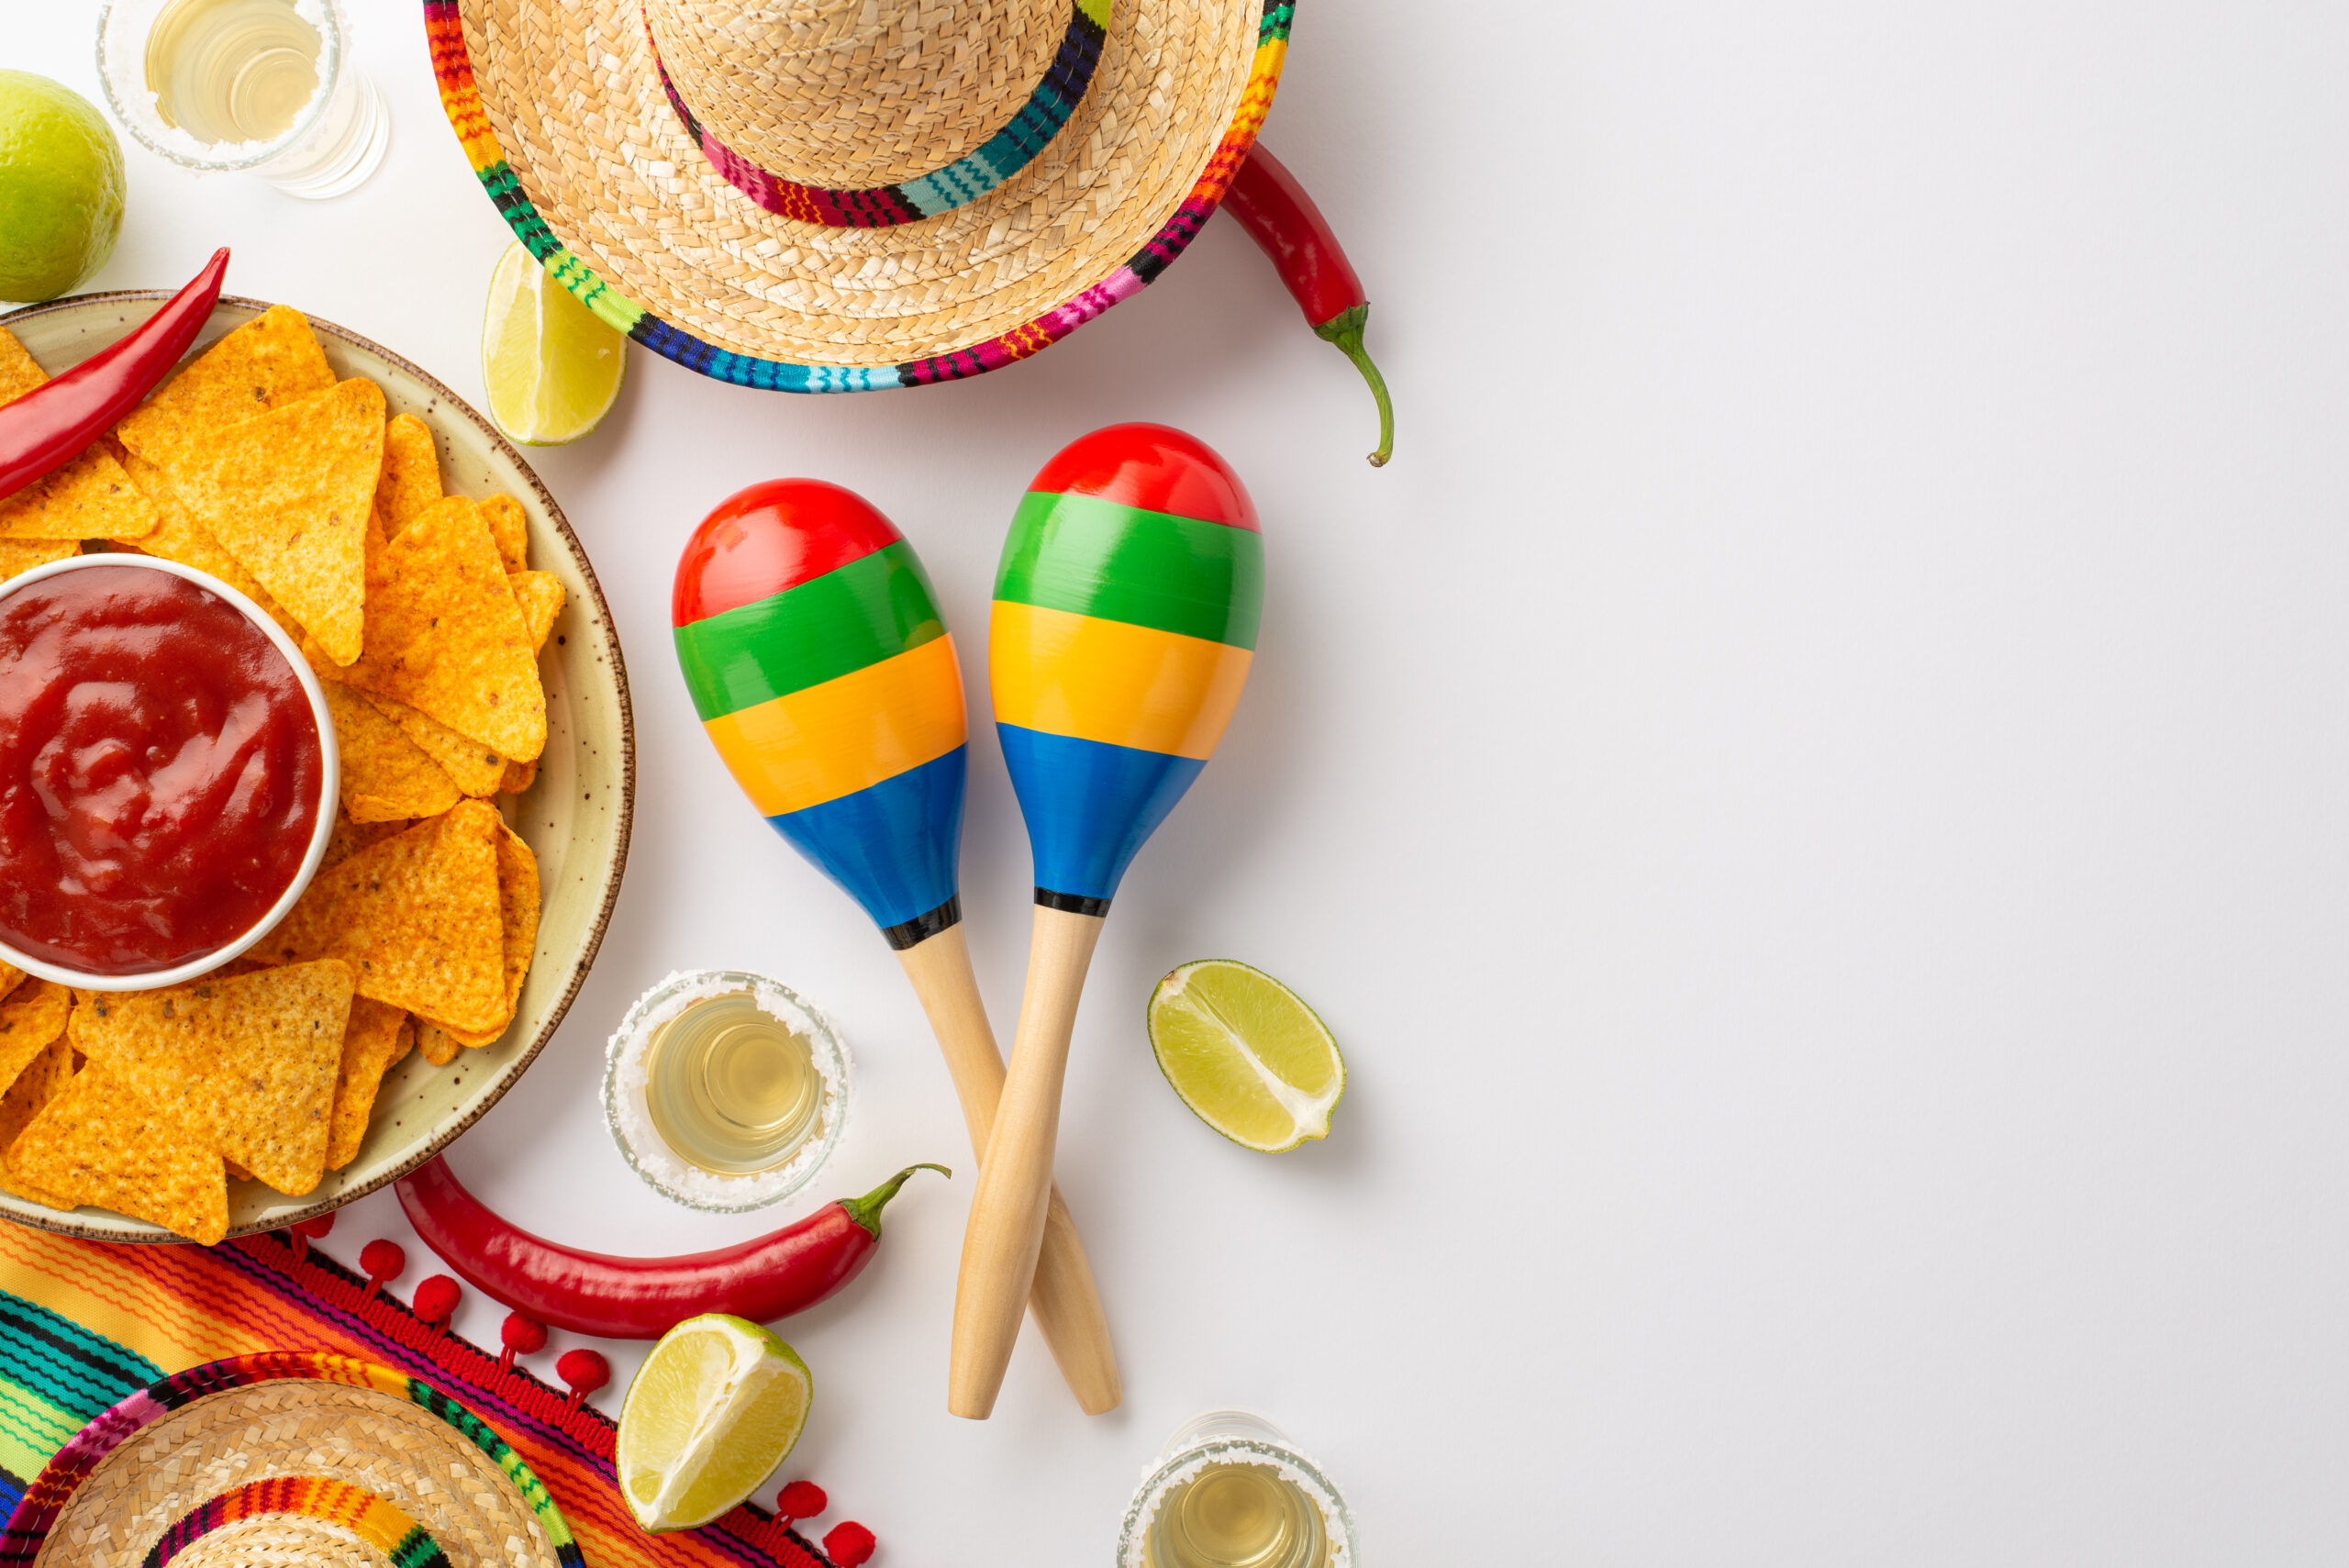 A vibrant Cinco de Mayo-inspired flat lay featuring a sombrero, poncho, maracas, tequila shots, lime, chili peppers, nacho chips, salsa on a bright yellow backdrop